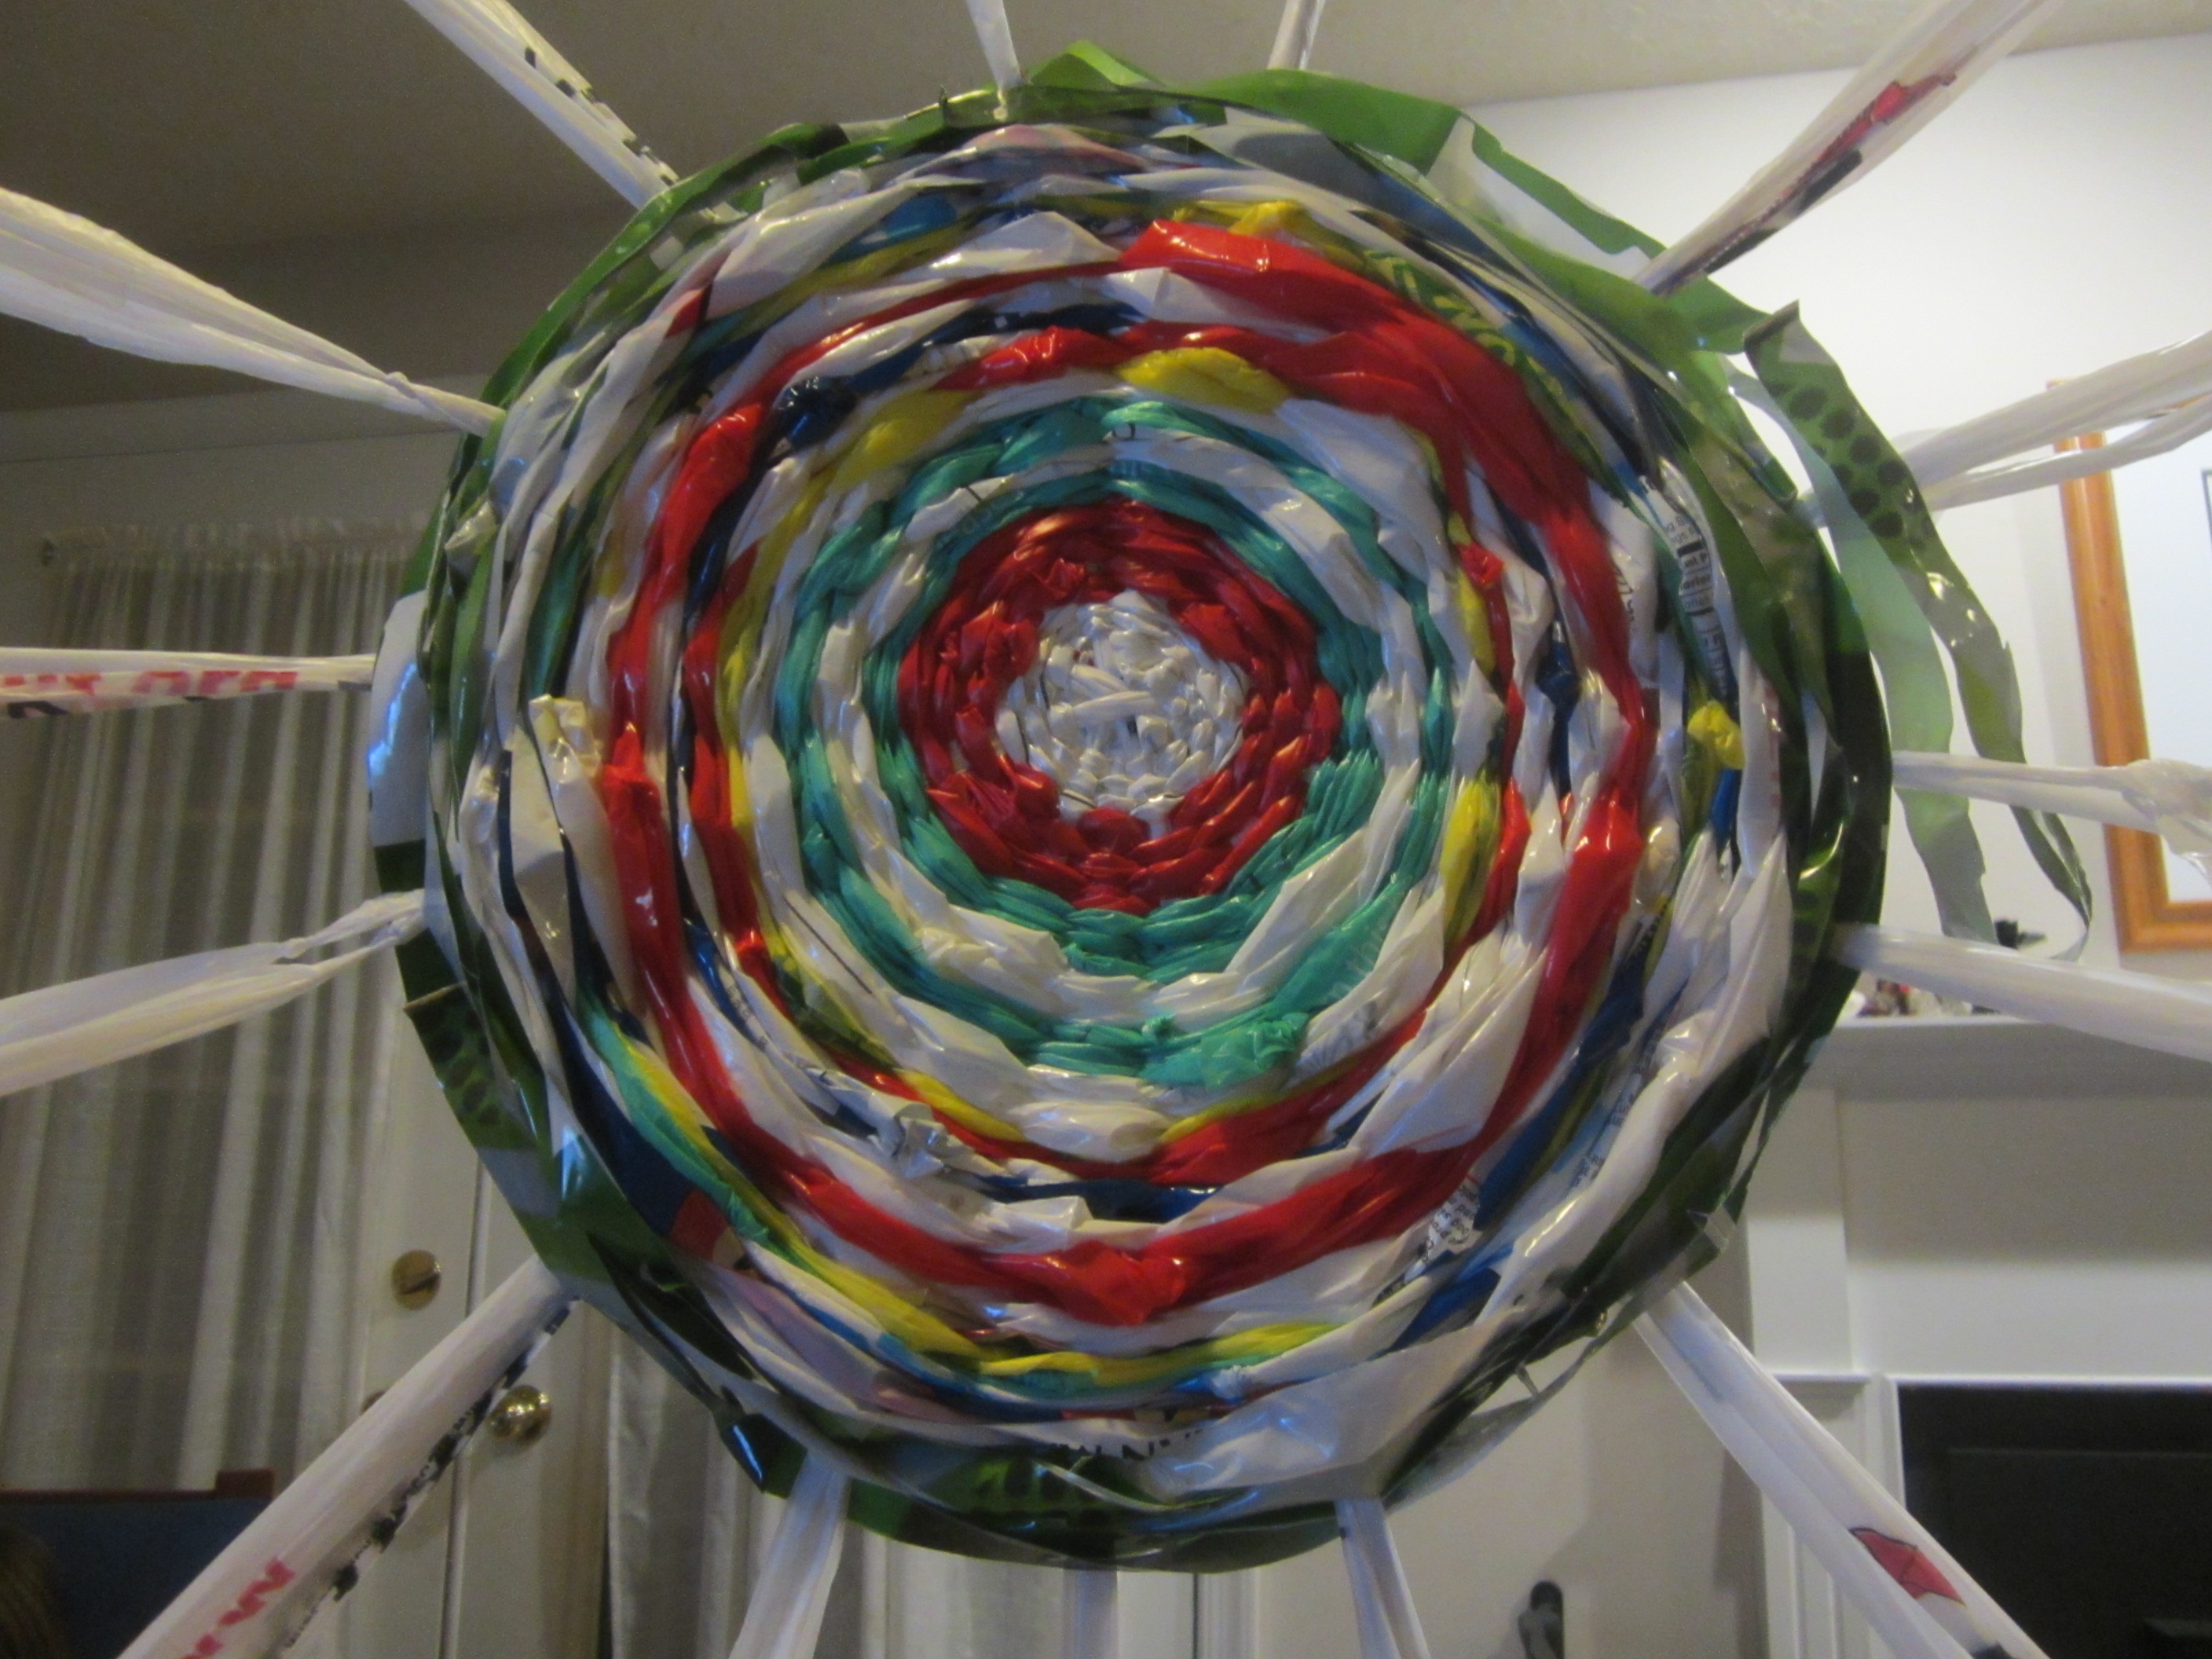 Woven spiral made from recycled plastic bags